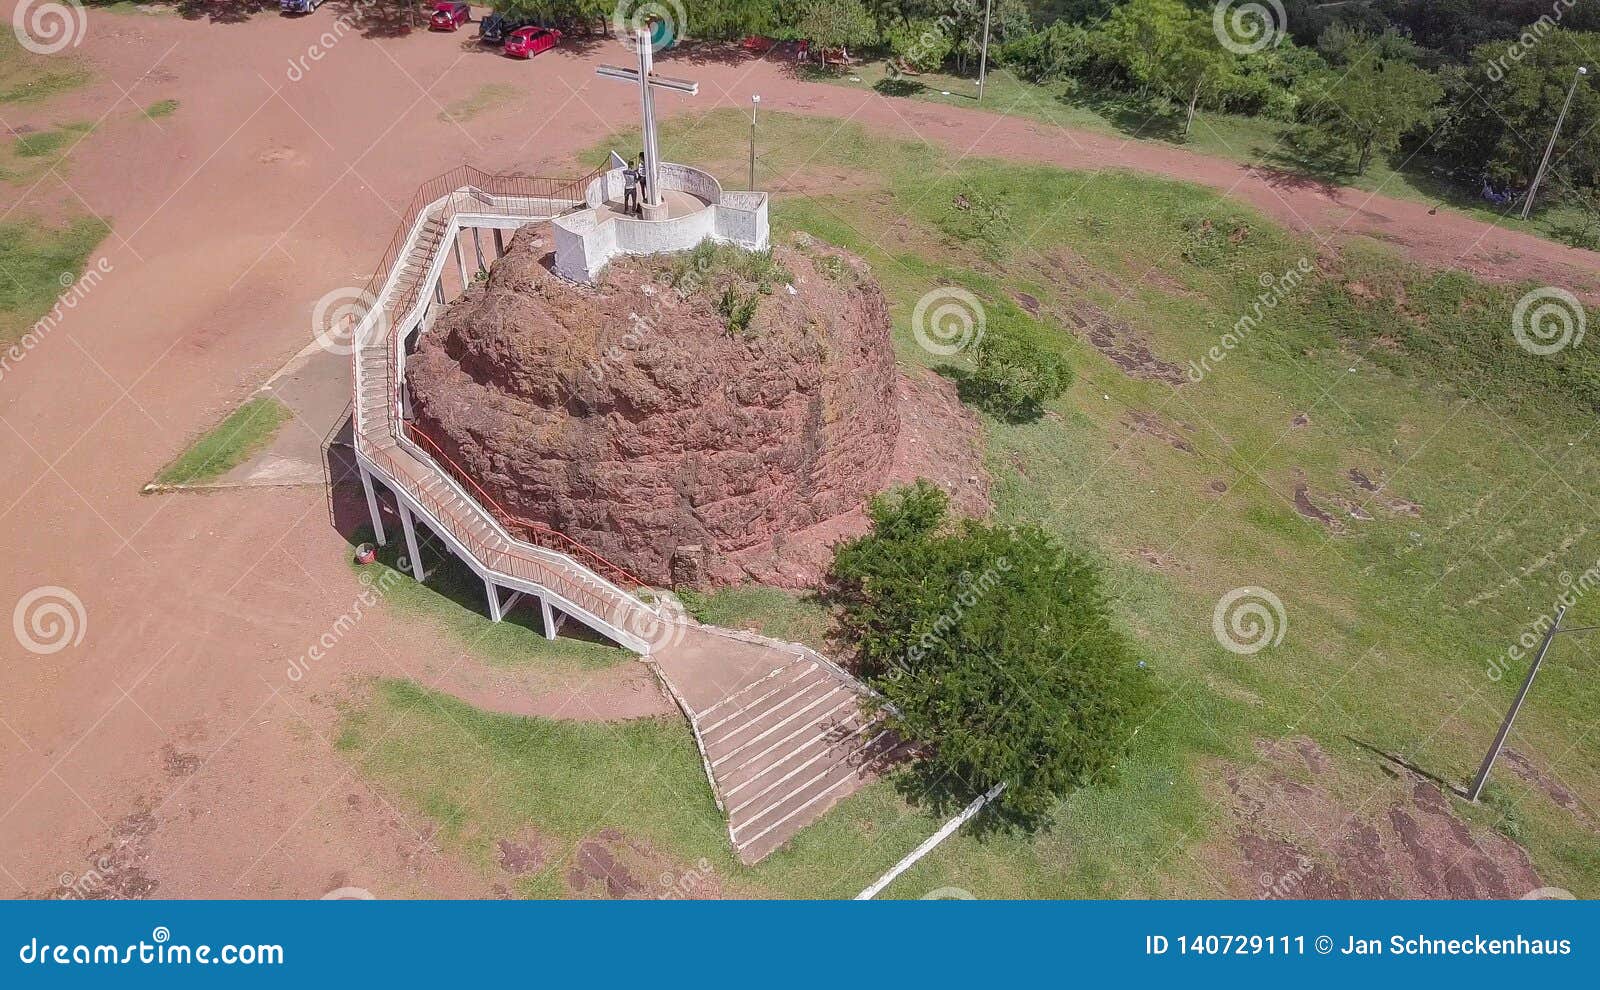 aerial photography from the observation deck at cerro pero in paraguay.